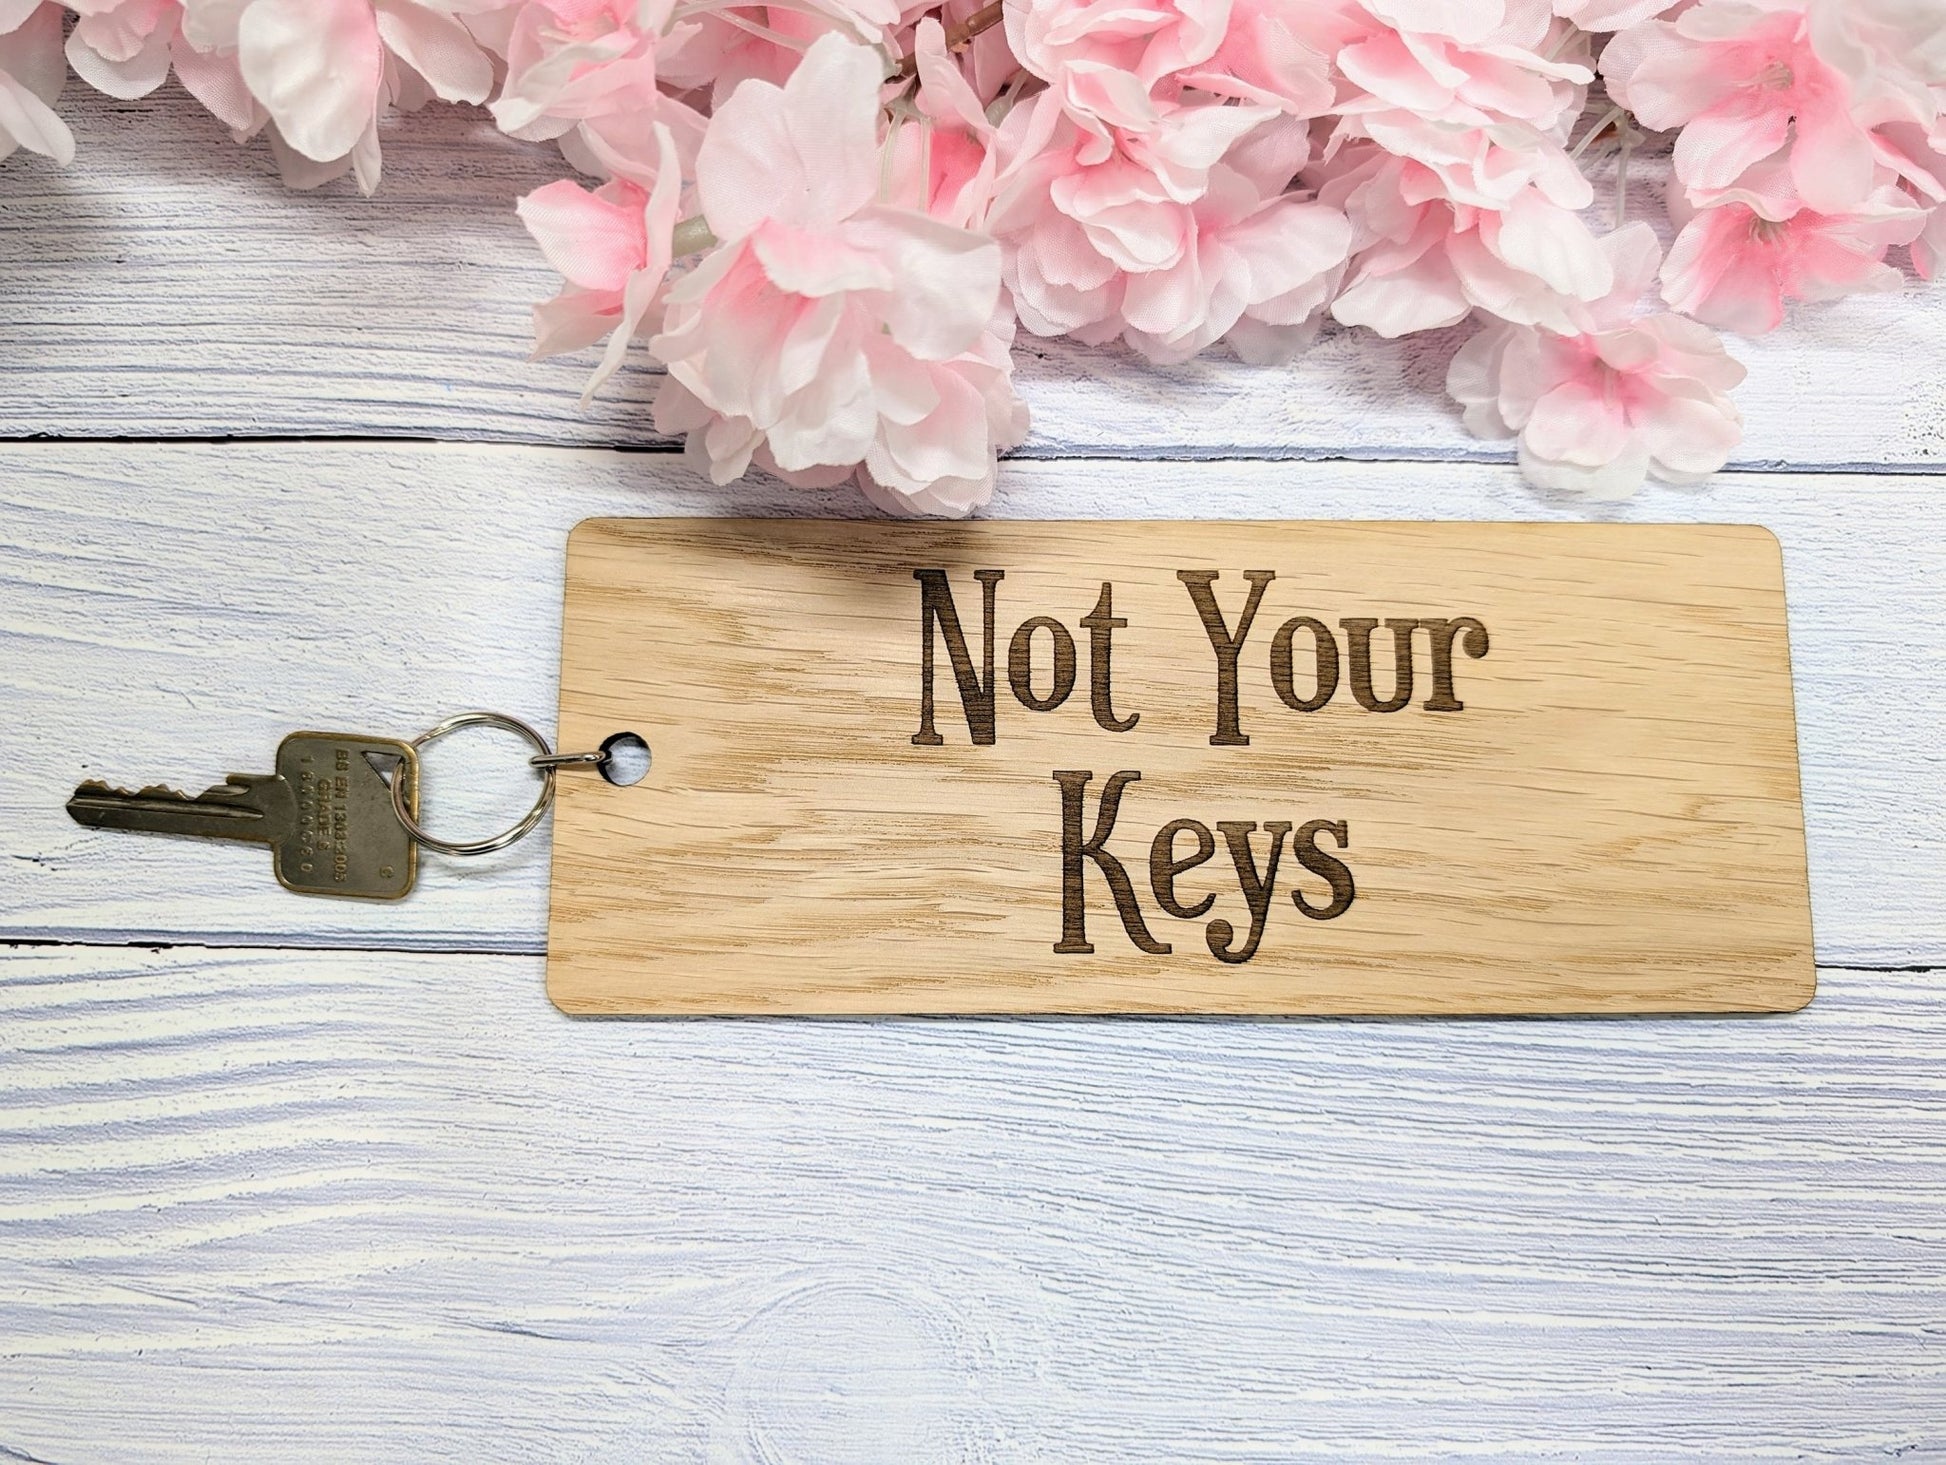 Extra-Large 200x80mm "Not Your Keys" Wooden Keyring – Humorous Oak Veneer Key Accessory for a Touch of Fun - CherryGroveCraft